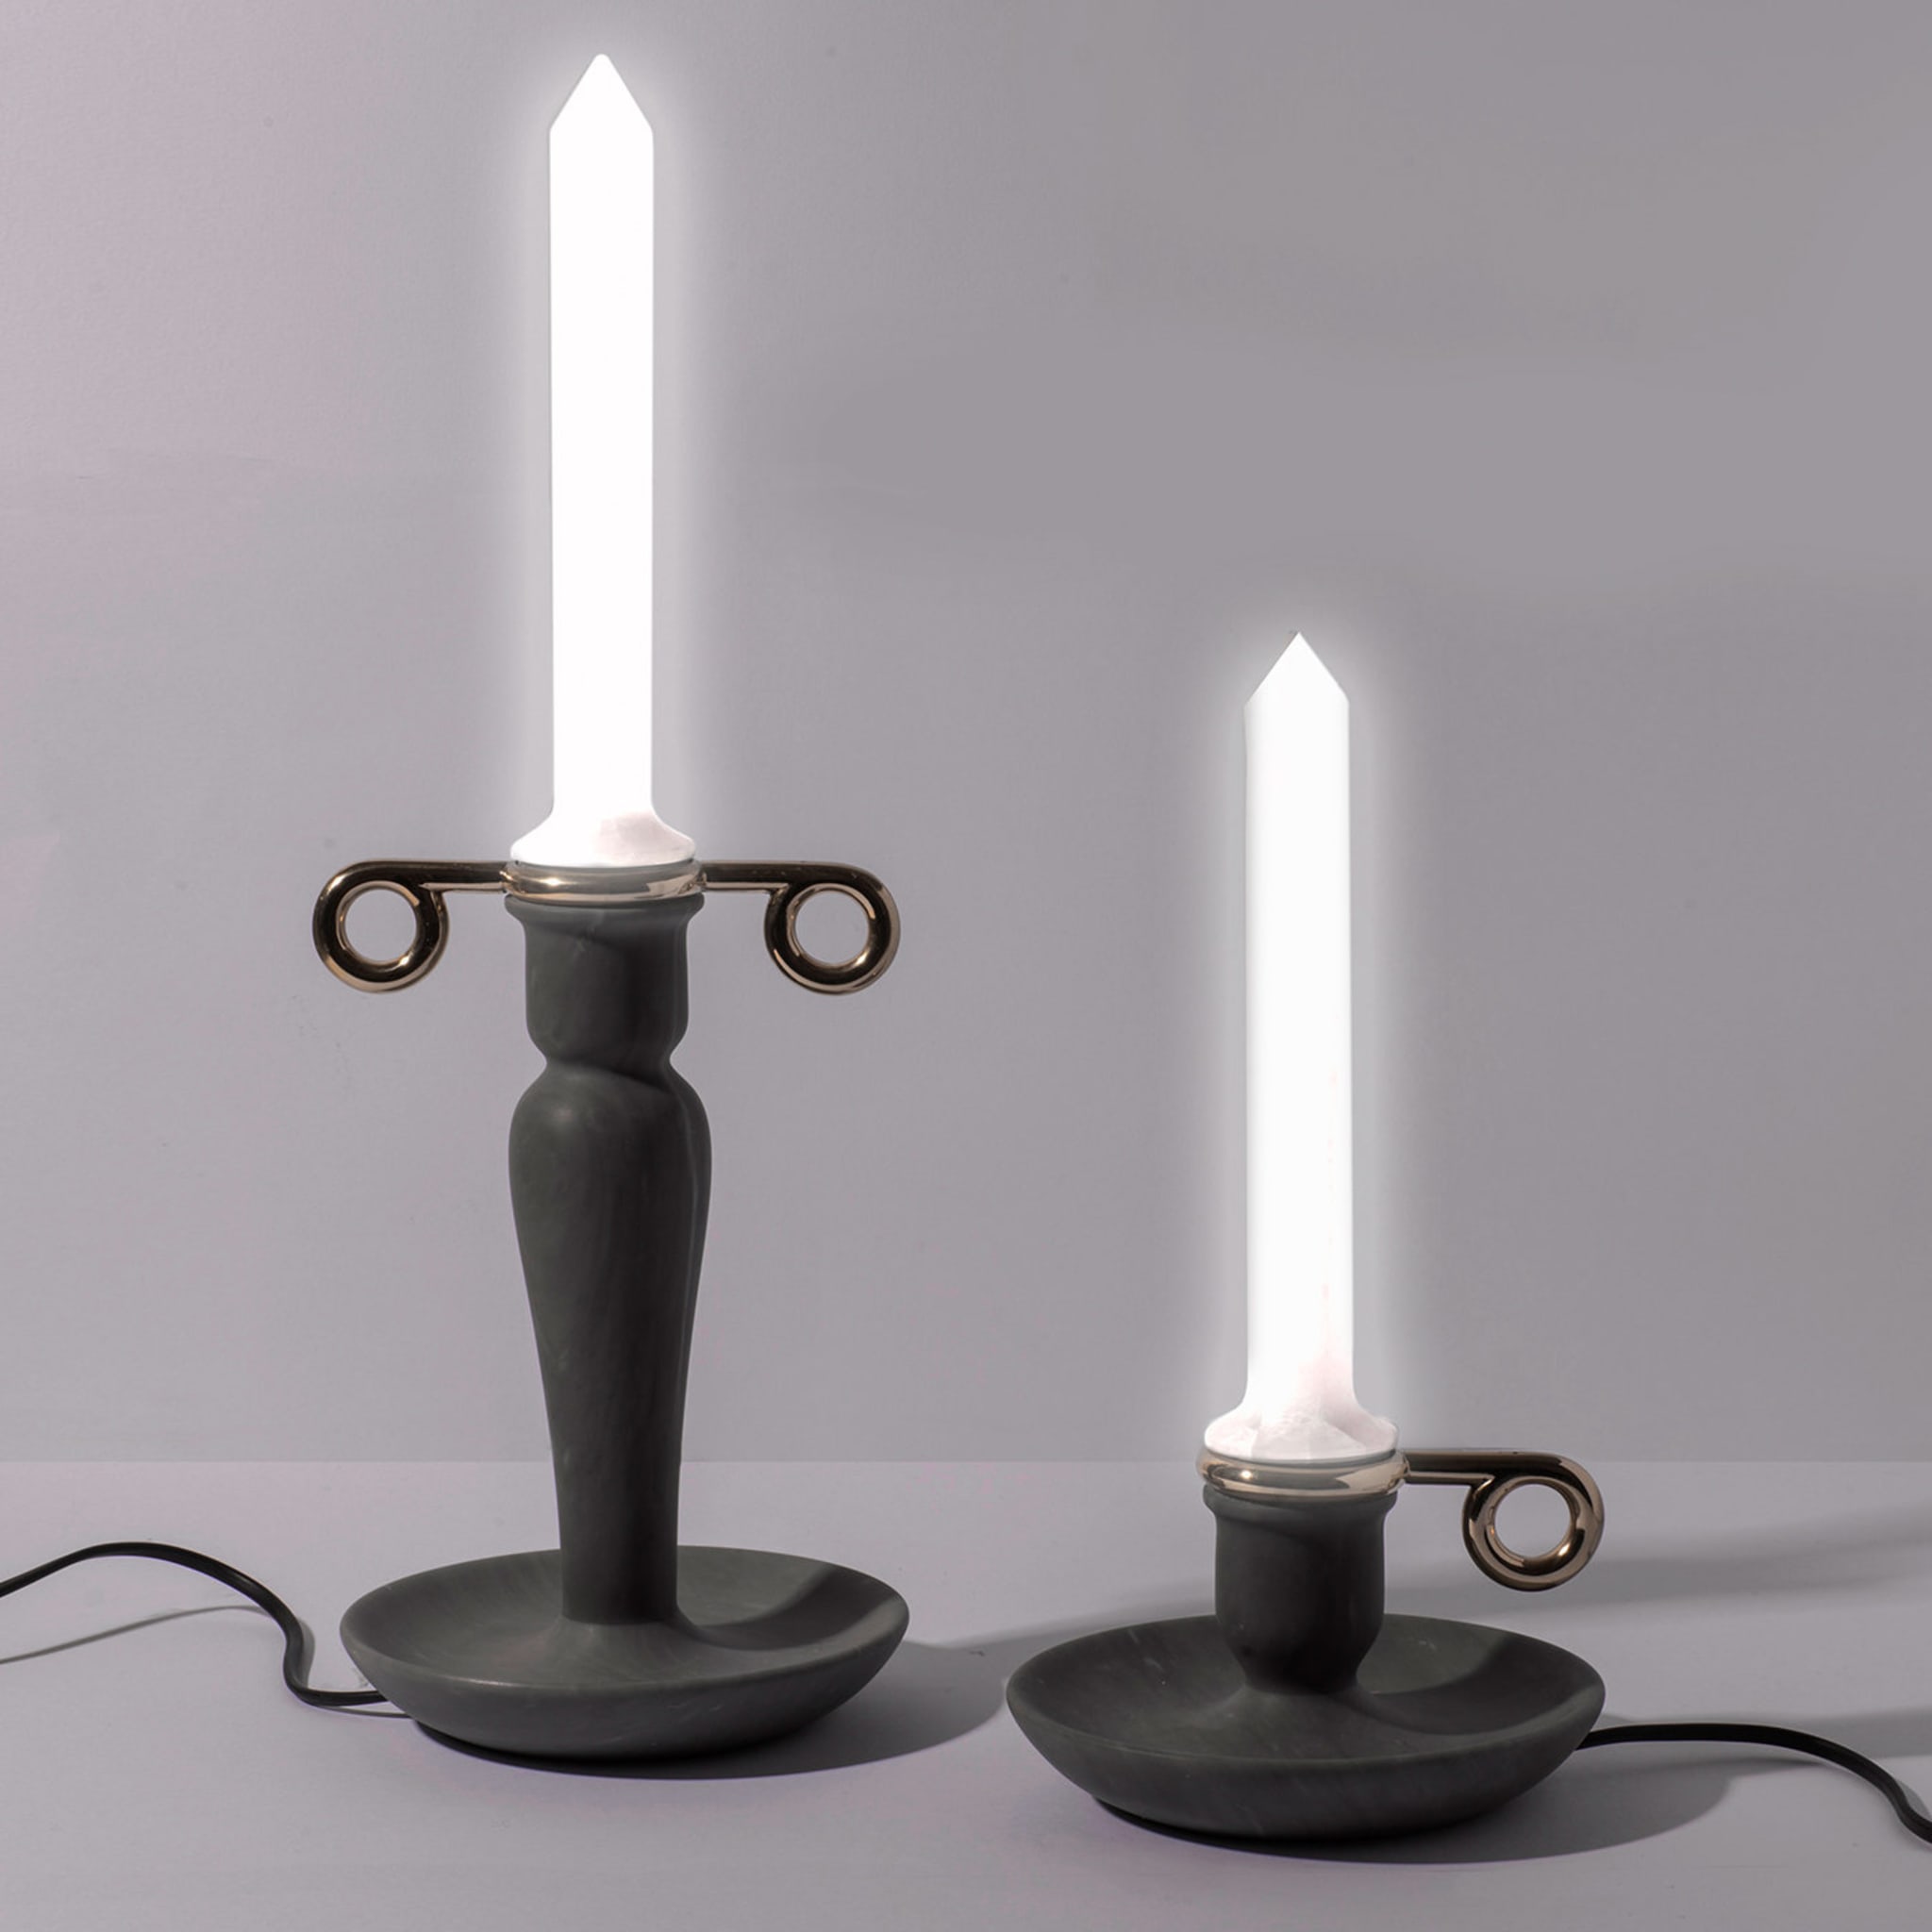 Candela Bardiglio Imperiale Marble Table Lamp - Alternative view 3